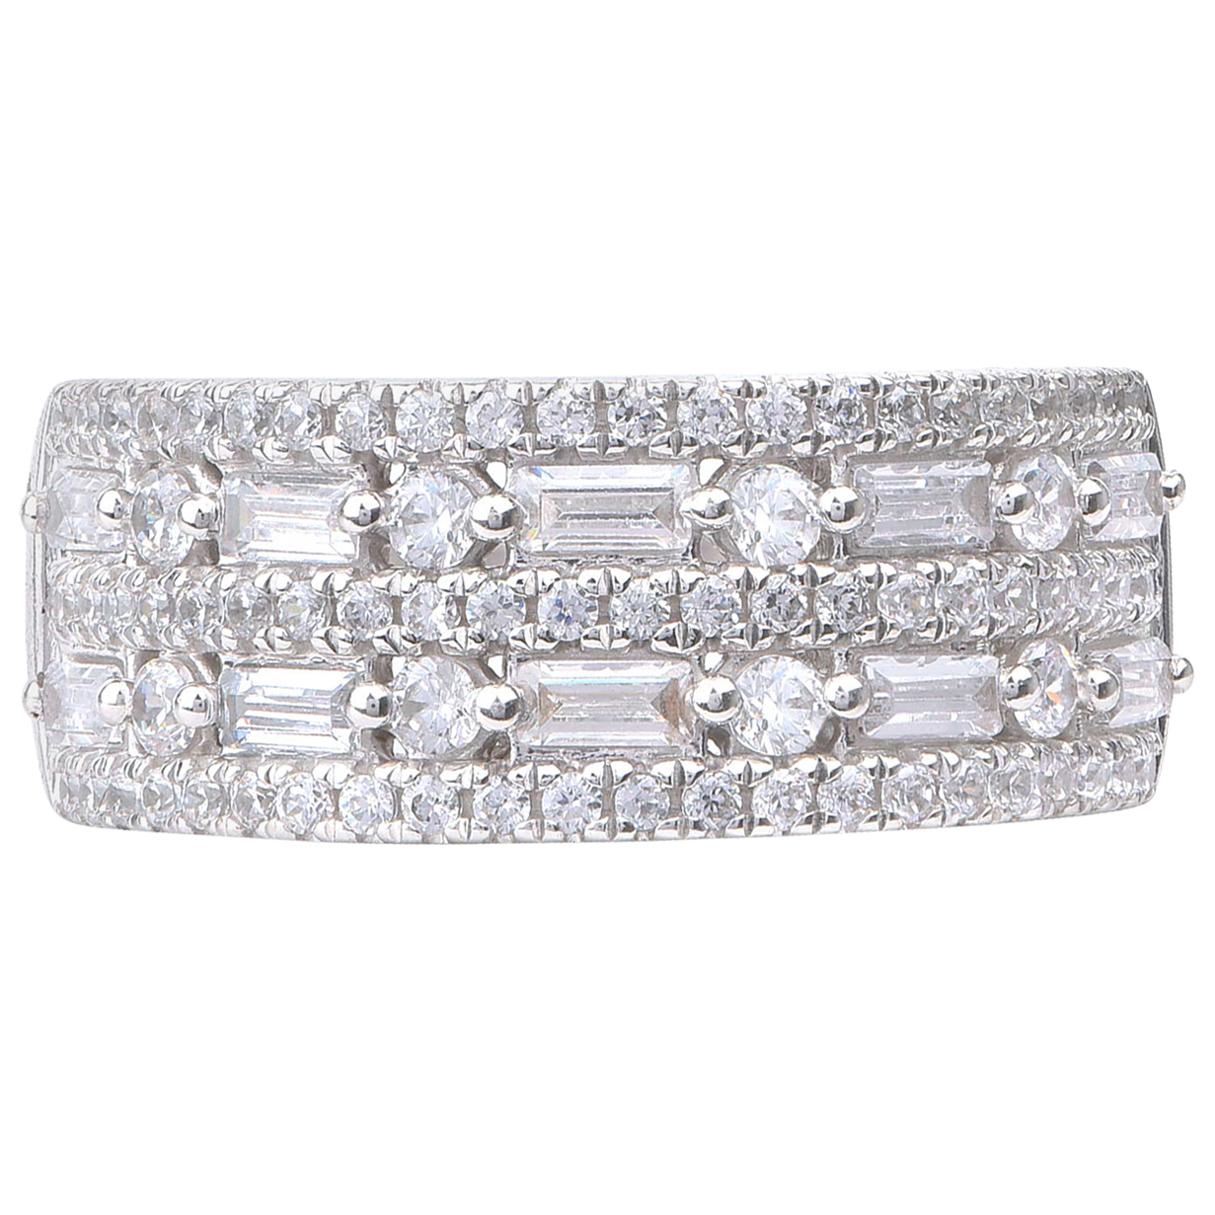 TJD 1 Carat Baguette and Round Diamond 18K White Gold Anniversary/Wedding Band